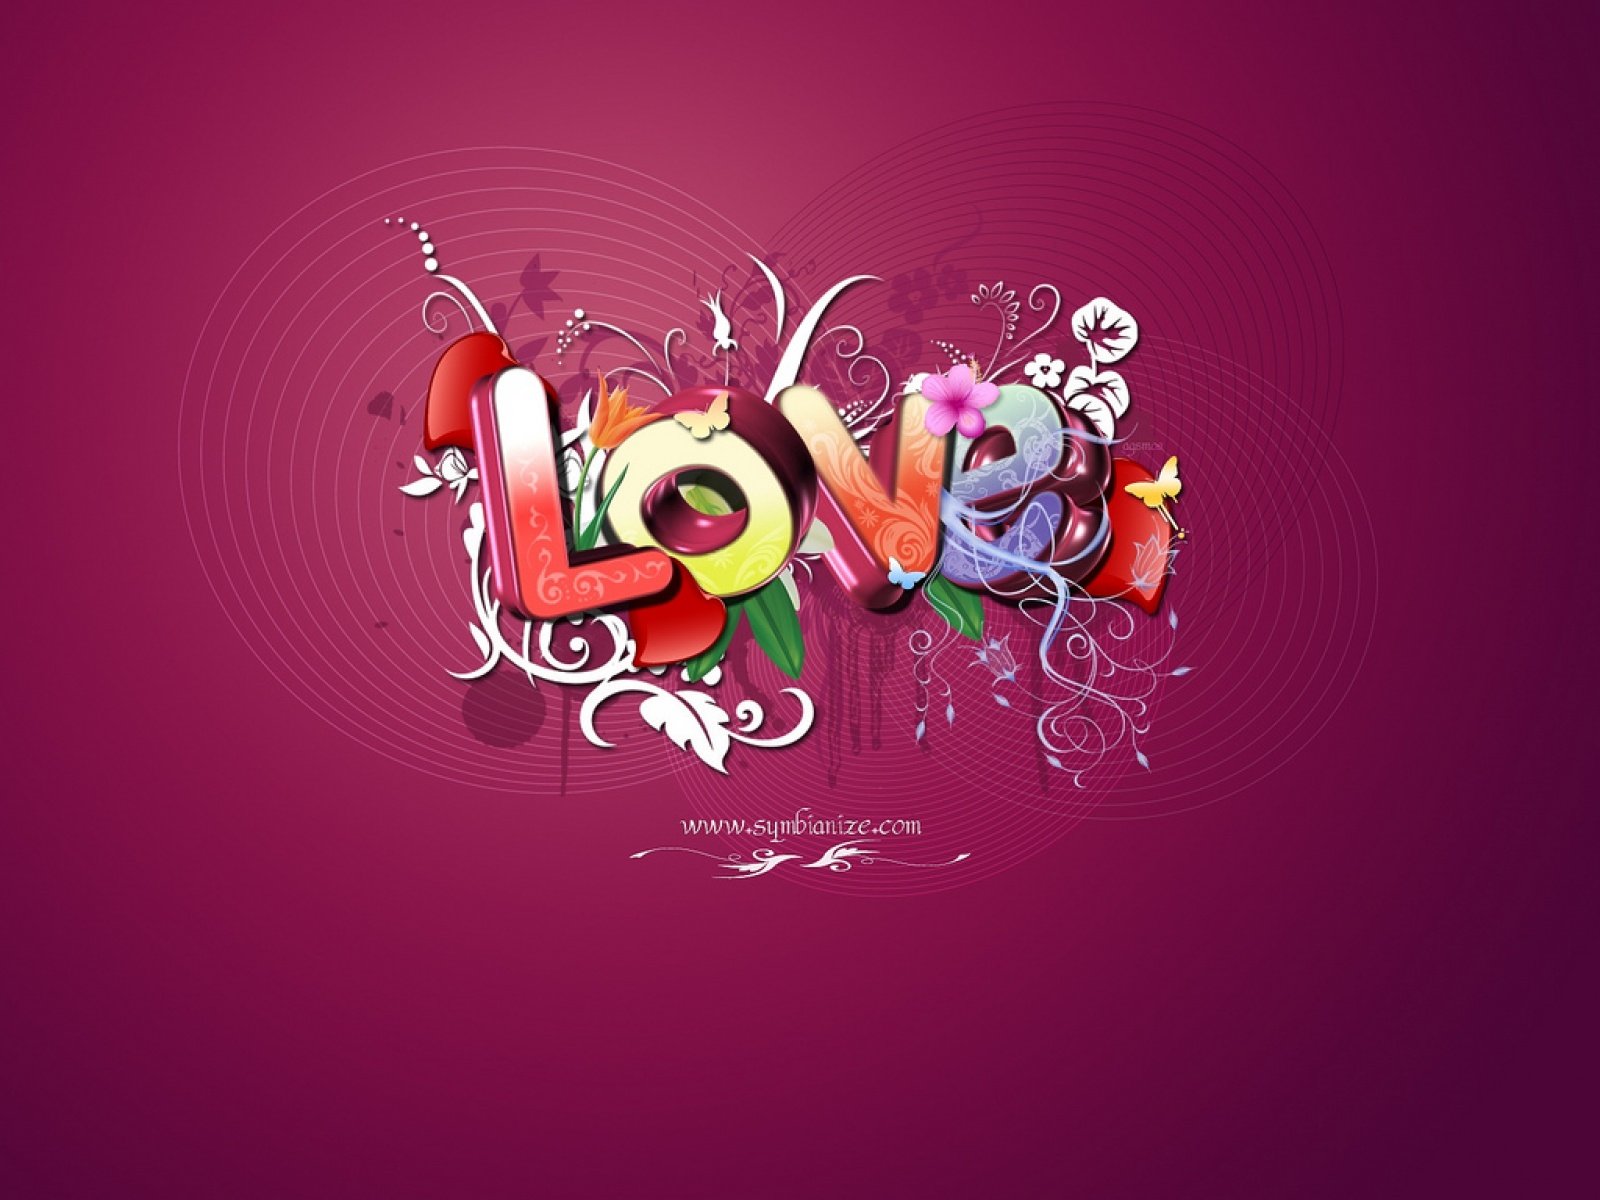 valentines day hd desktop backgrounds wallpapers valentines day hd